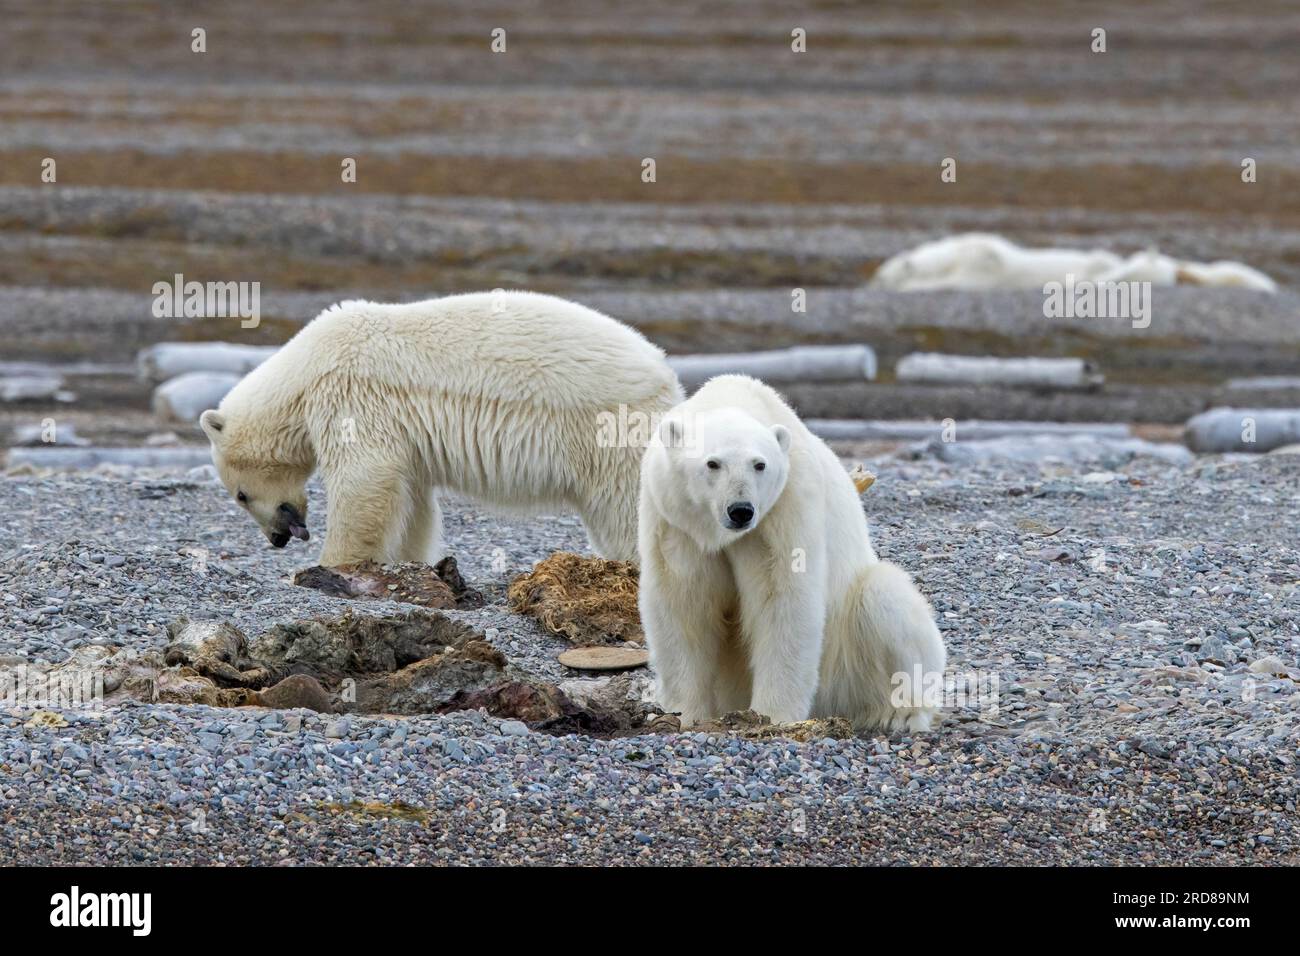 Two young scavenging polar bears (Ursus maritimus) feeding on carcass of dead stranded whale along the Svalbard coast, Spitsbergen, Norway Stock Photo